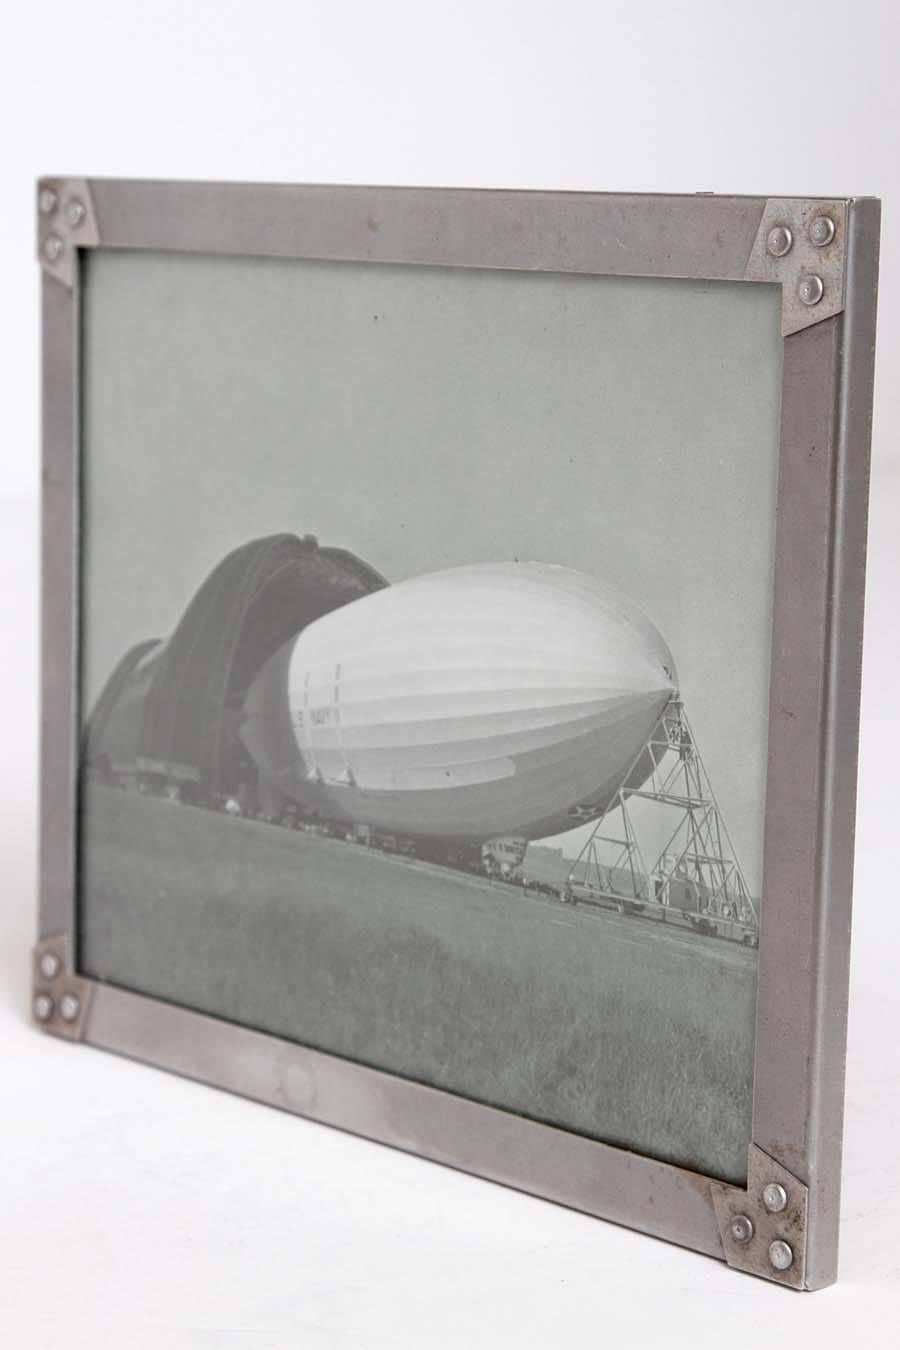 Machine Age Art Deco USS Akron Goodyear Zeppelin Duralumin Framed Litho  Price Reduced from $1500

Unusual smaller size and opposite view from the Margaret Bourke - White signed photo version.
The frame corners are constructed from duralumin